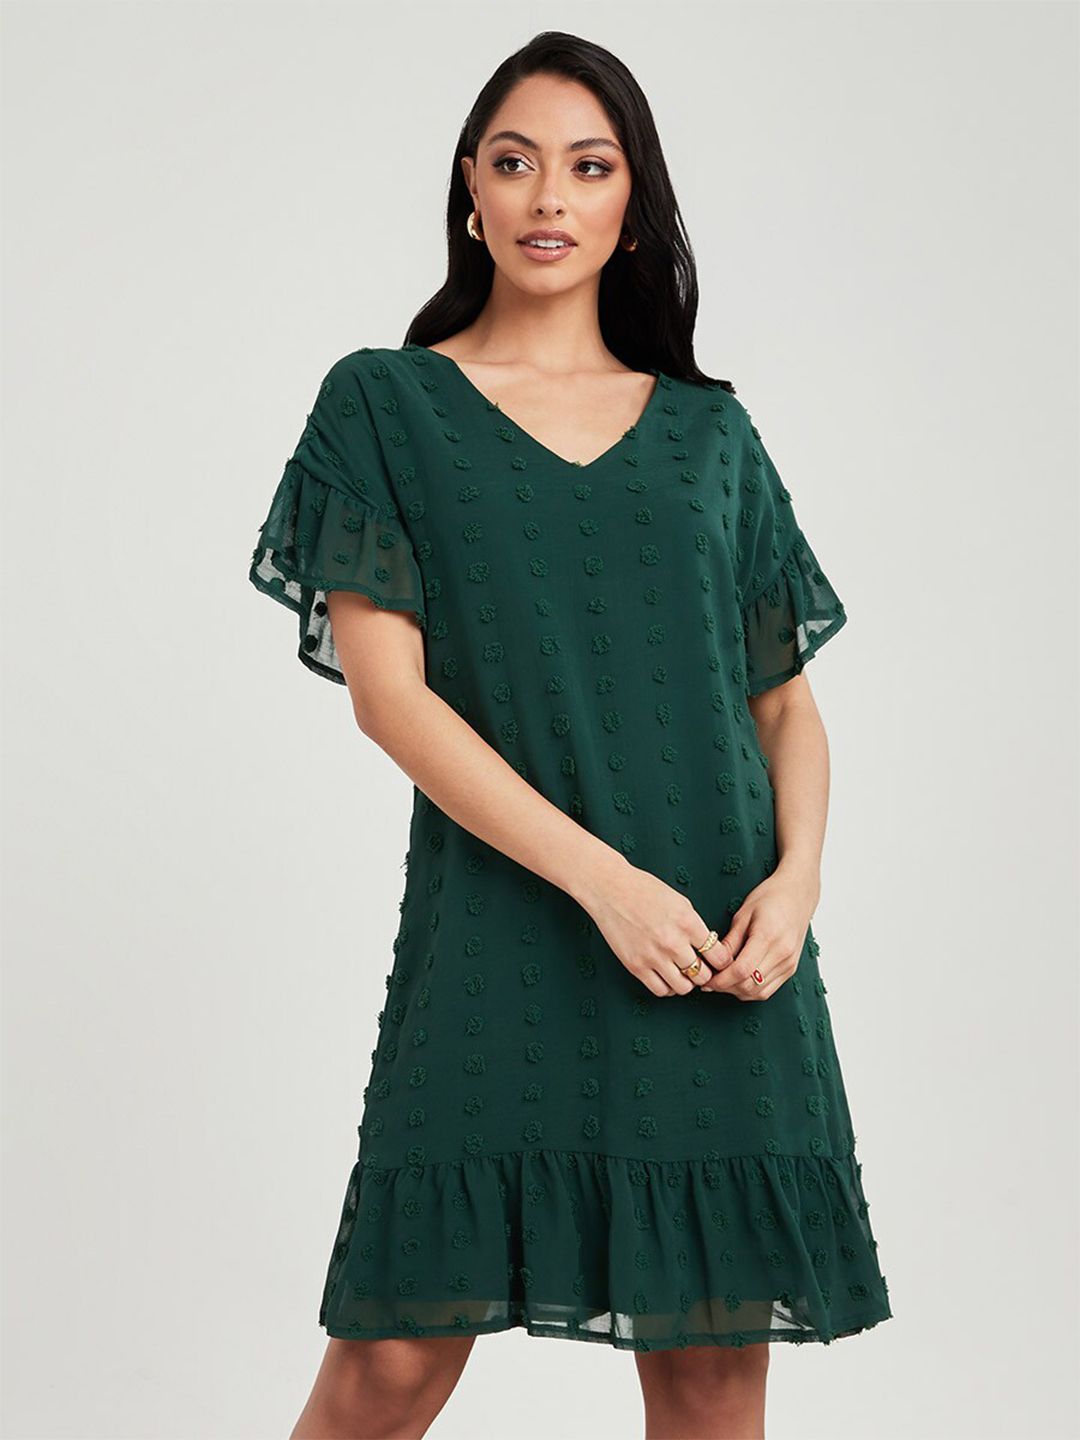 Styli Green A-Line Dress Price in India